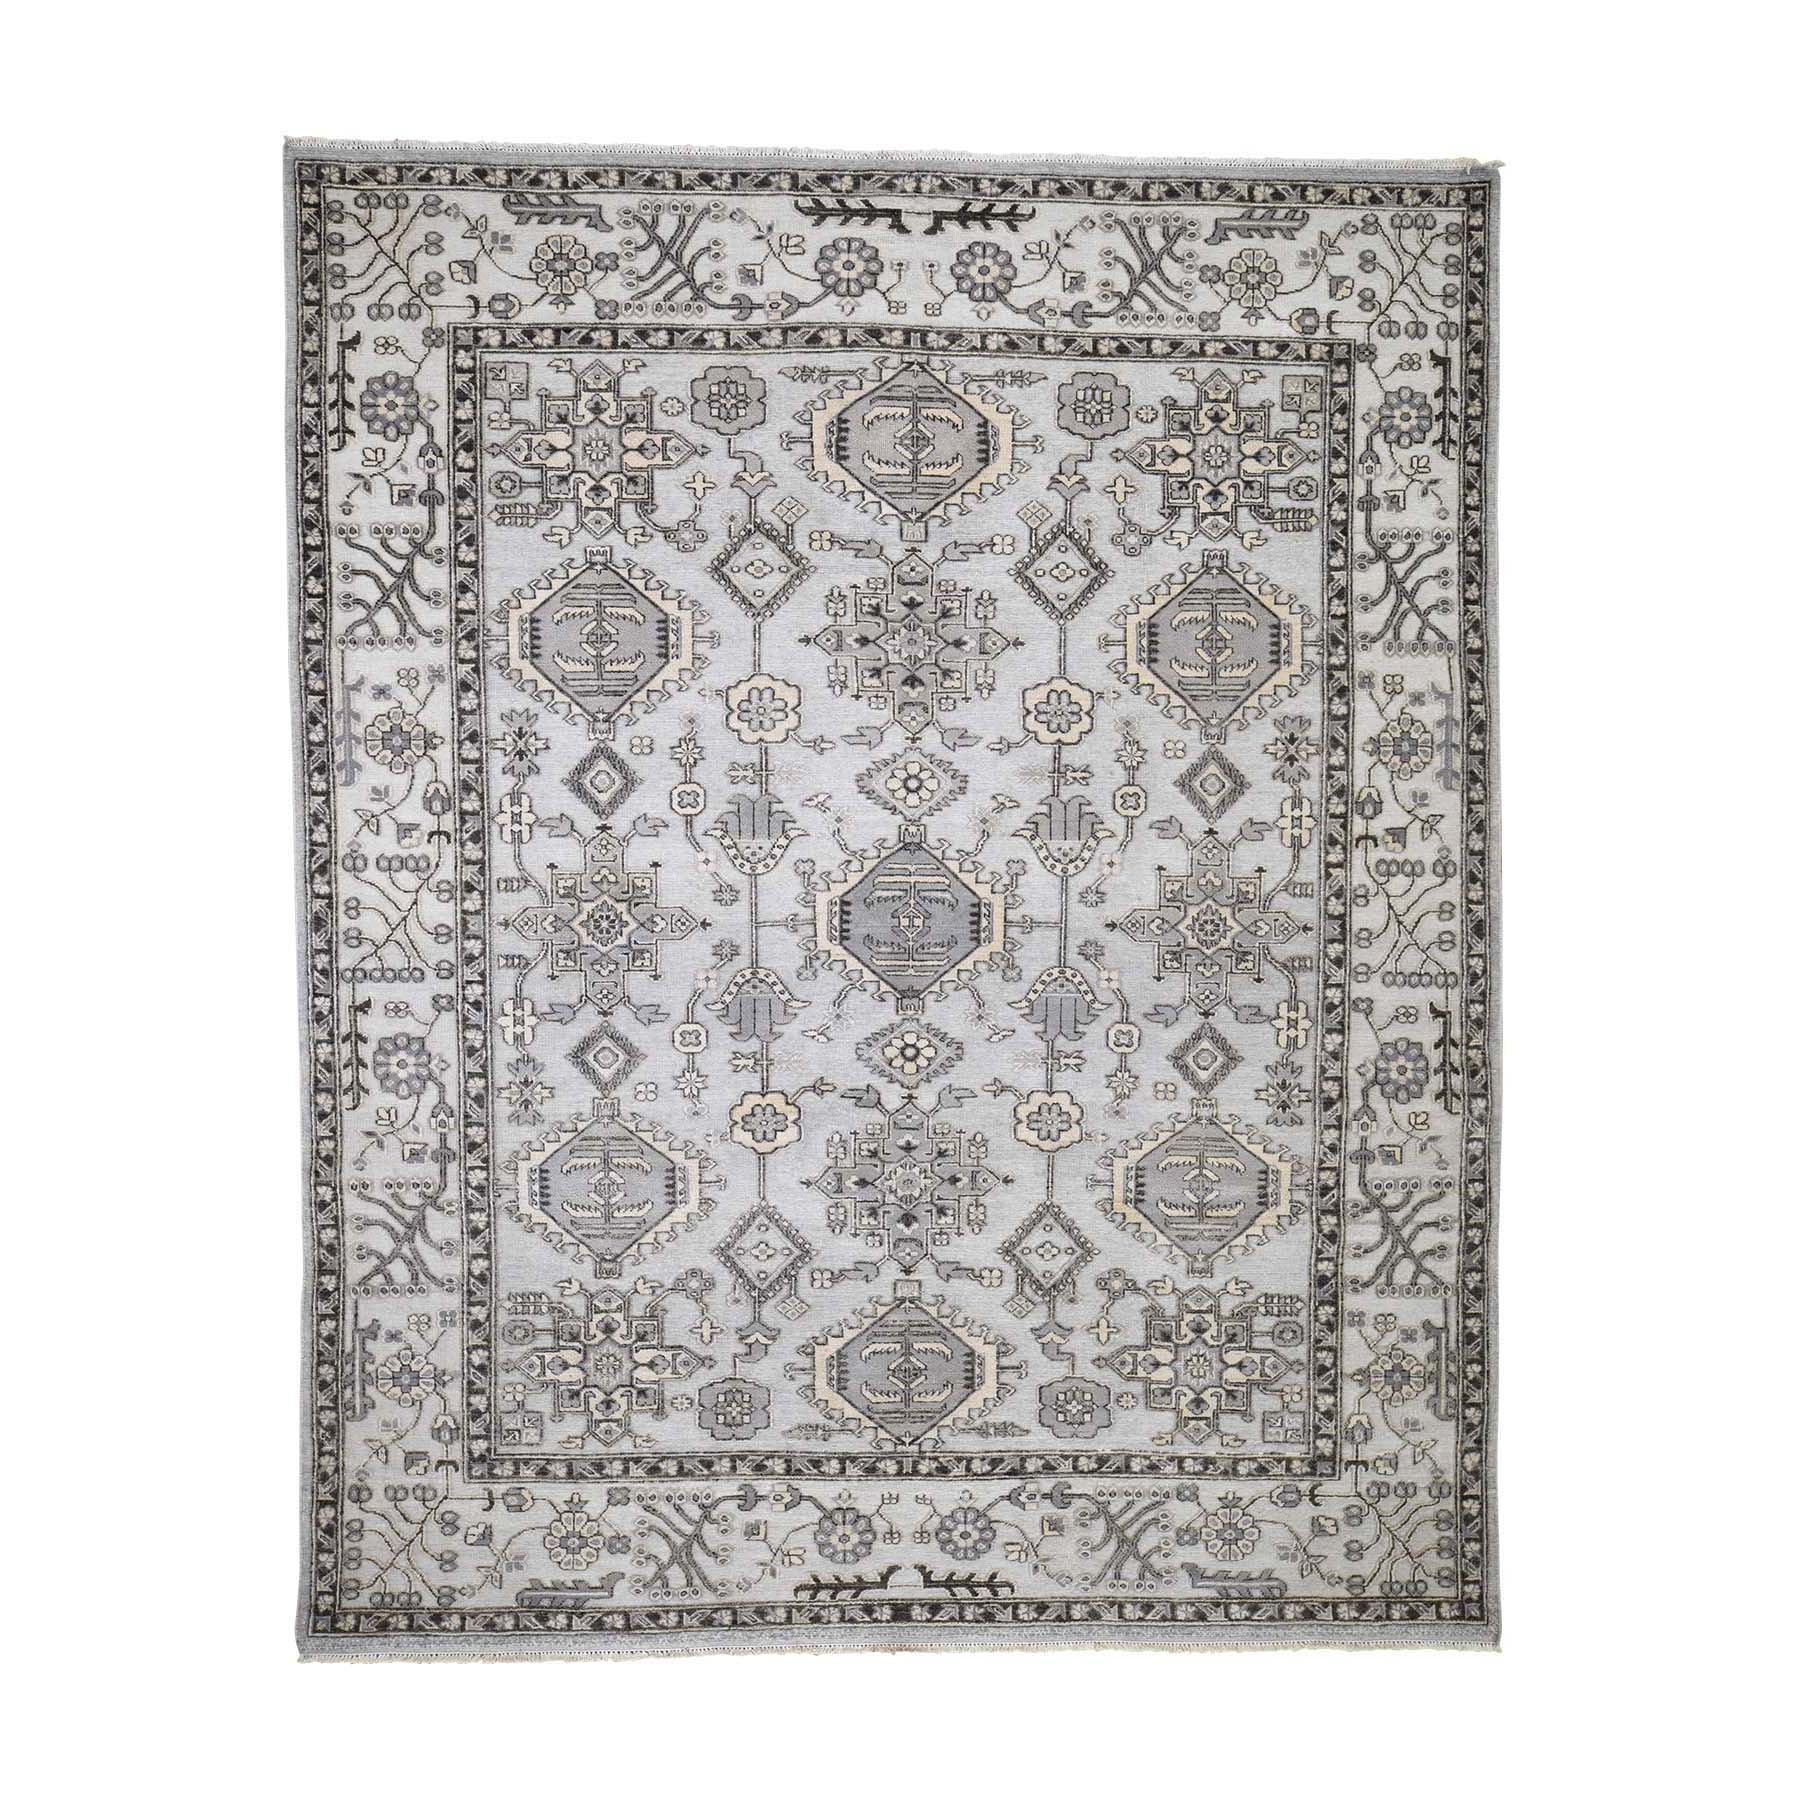 8'x9'10" Textured Pile With Textured Wool Hi-Low Peshawar Hand Woven Oriental Rug 